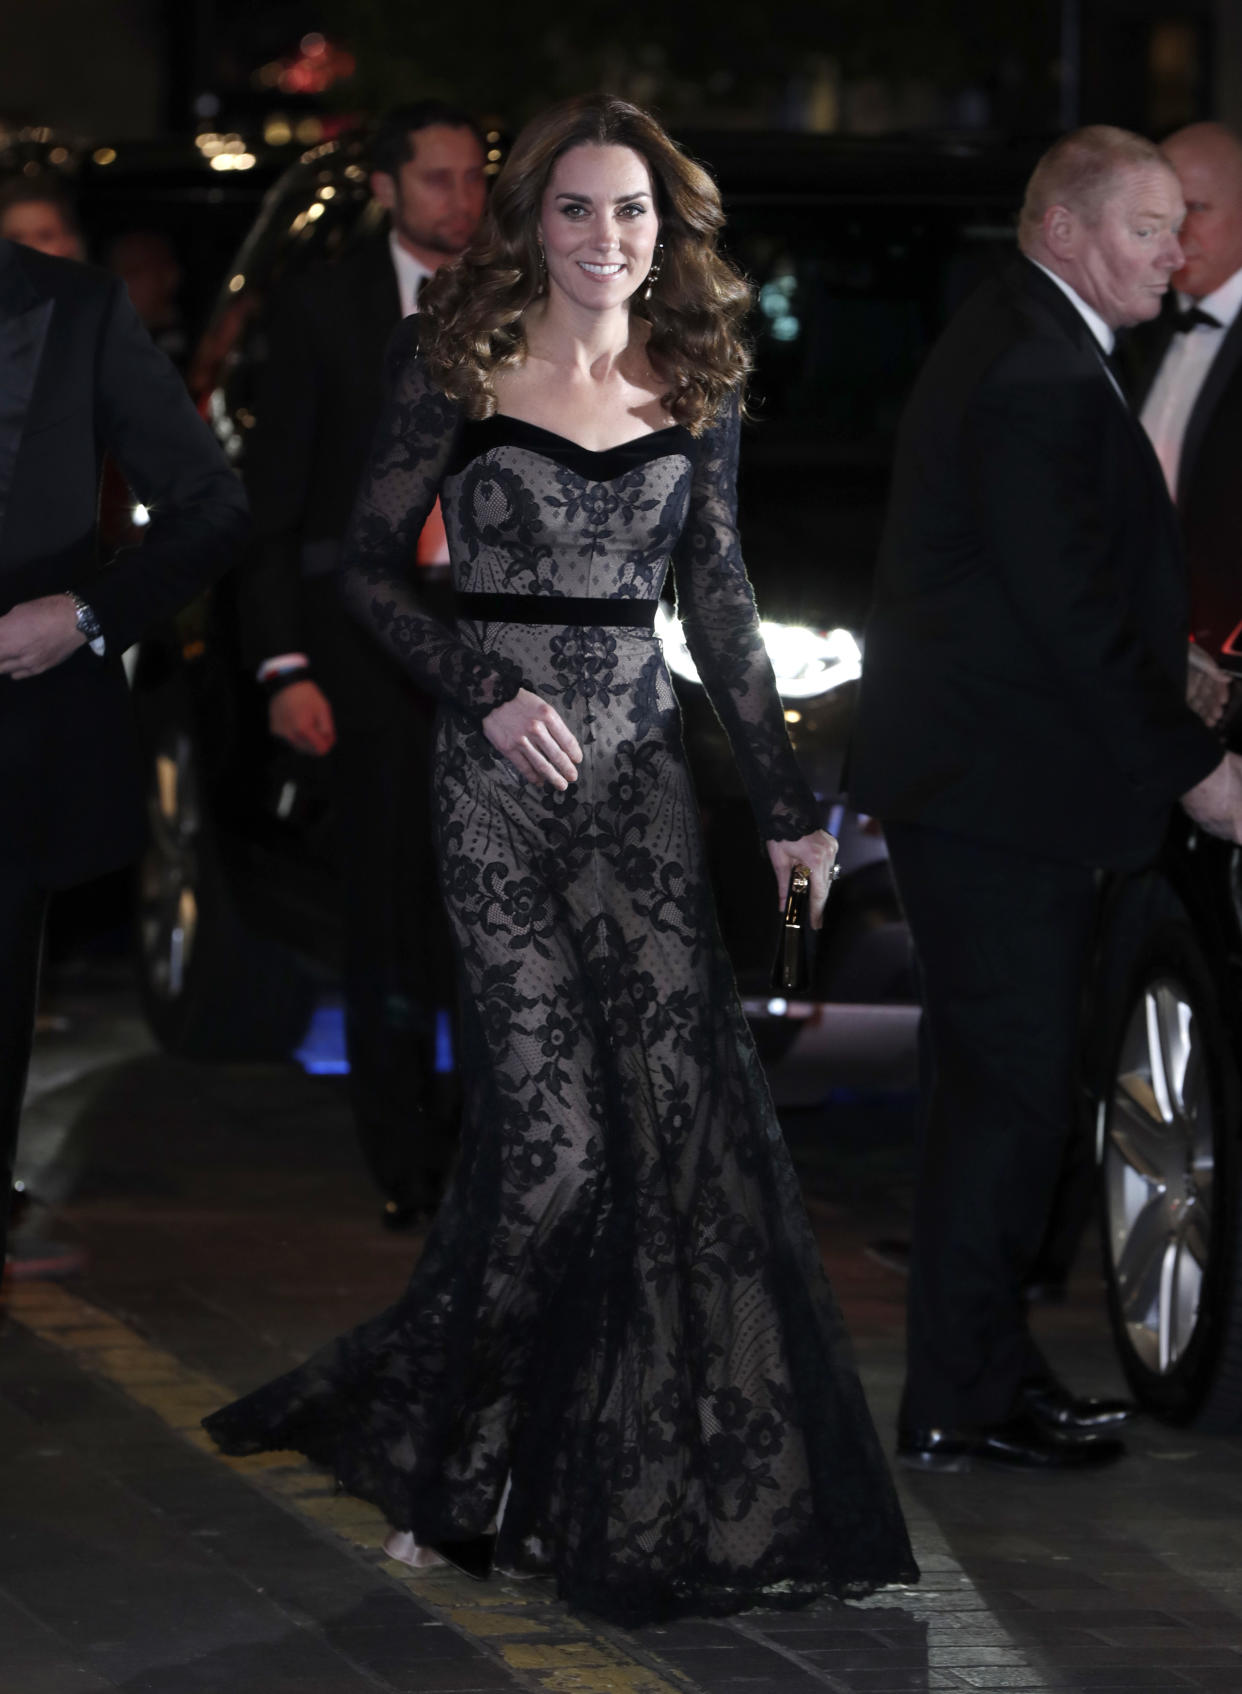 The Duchess of Cambridge stunned in a McQueen dress at the Royal Variety Performance. [Photo: Getty]